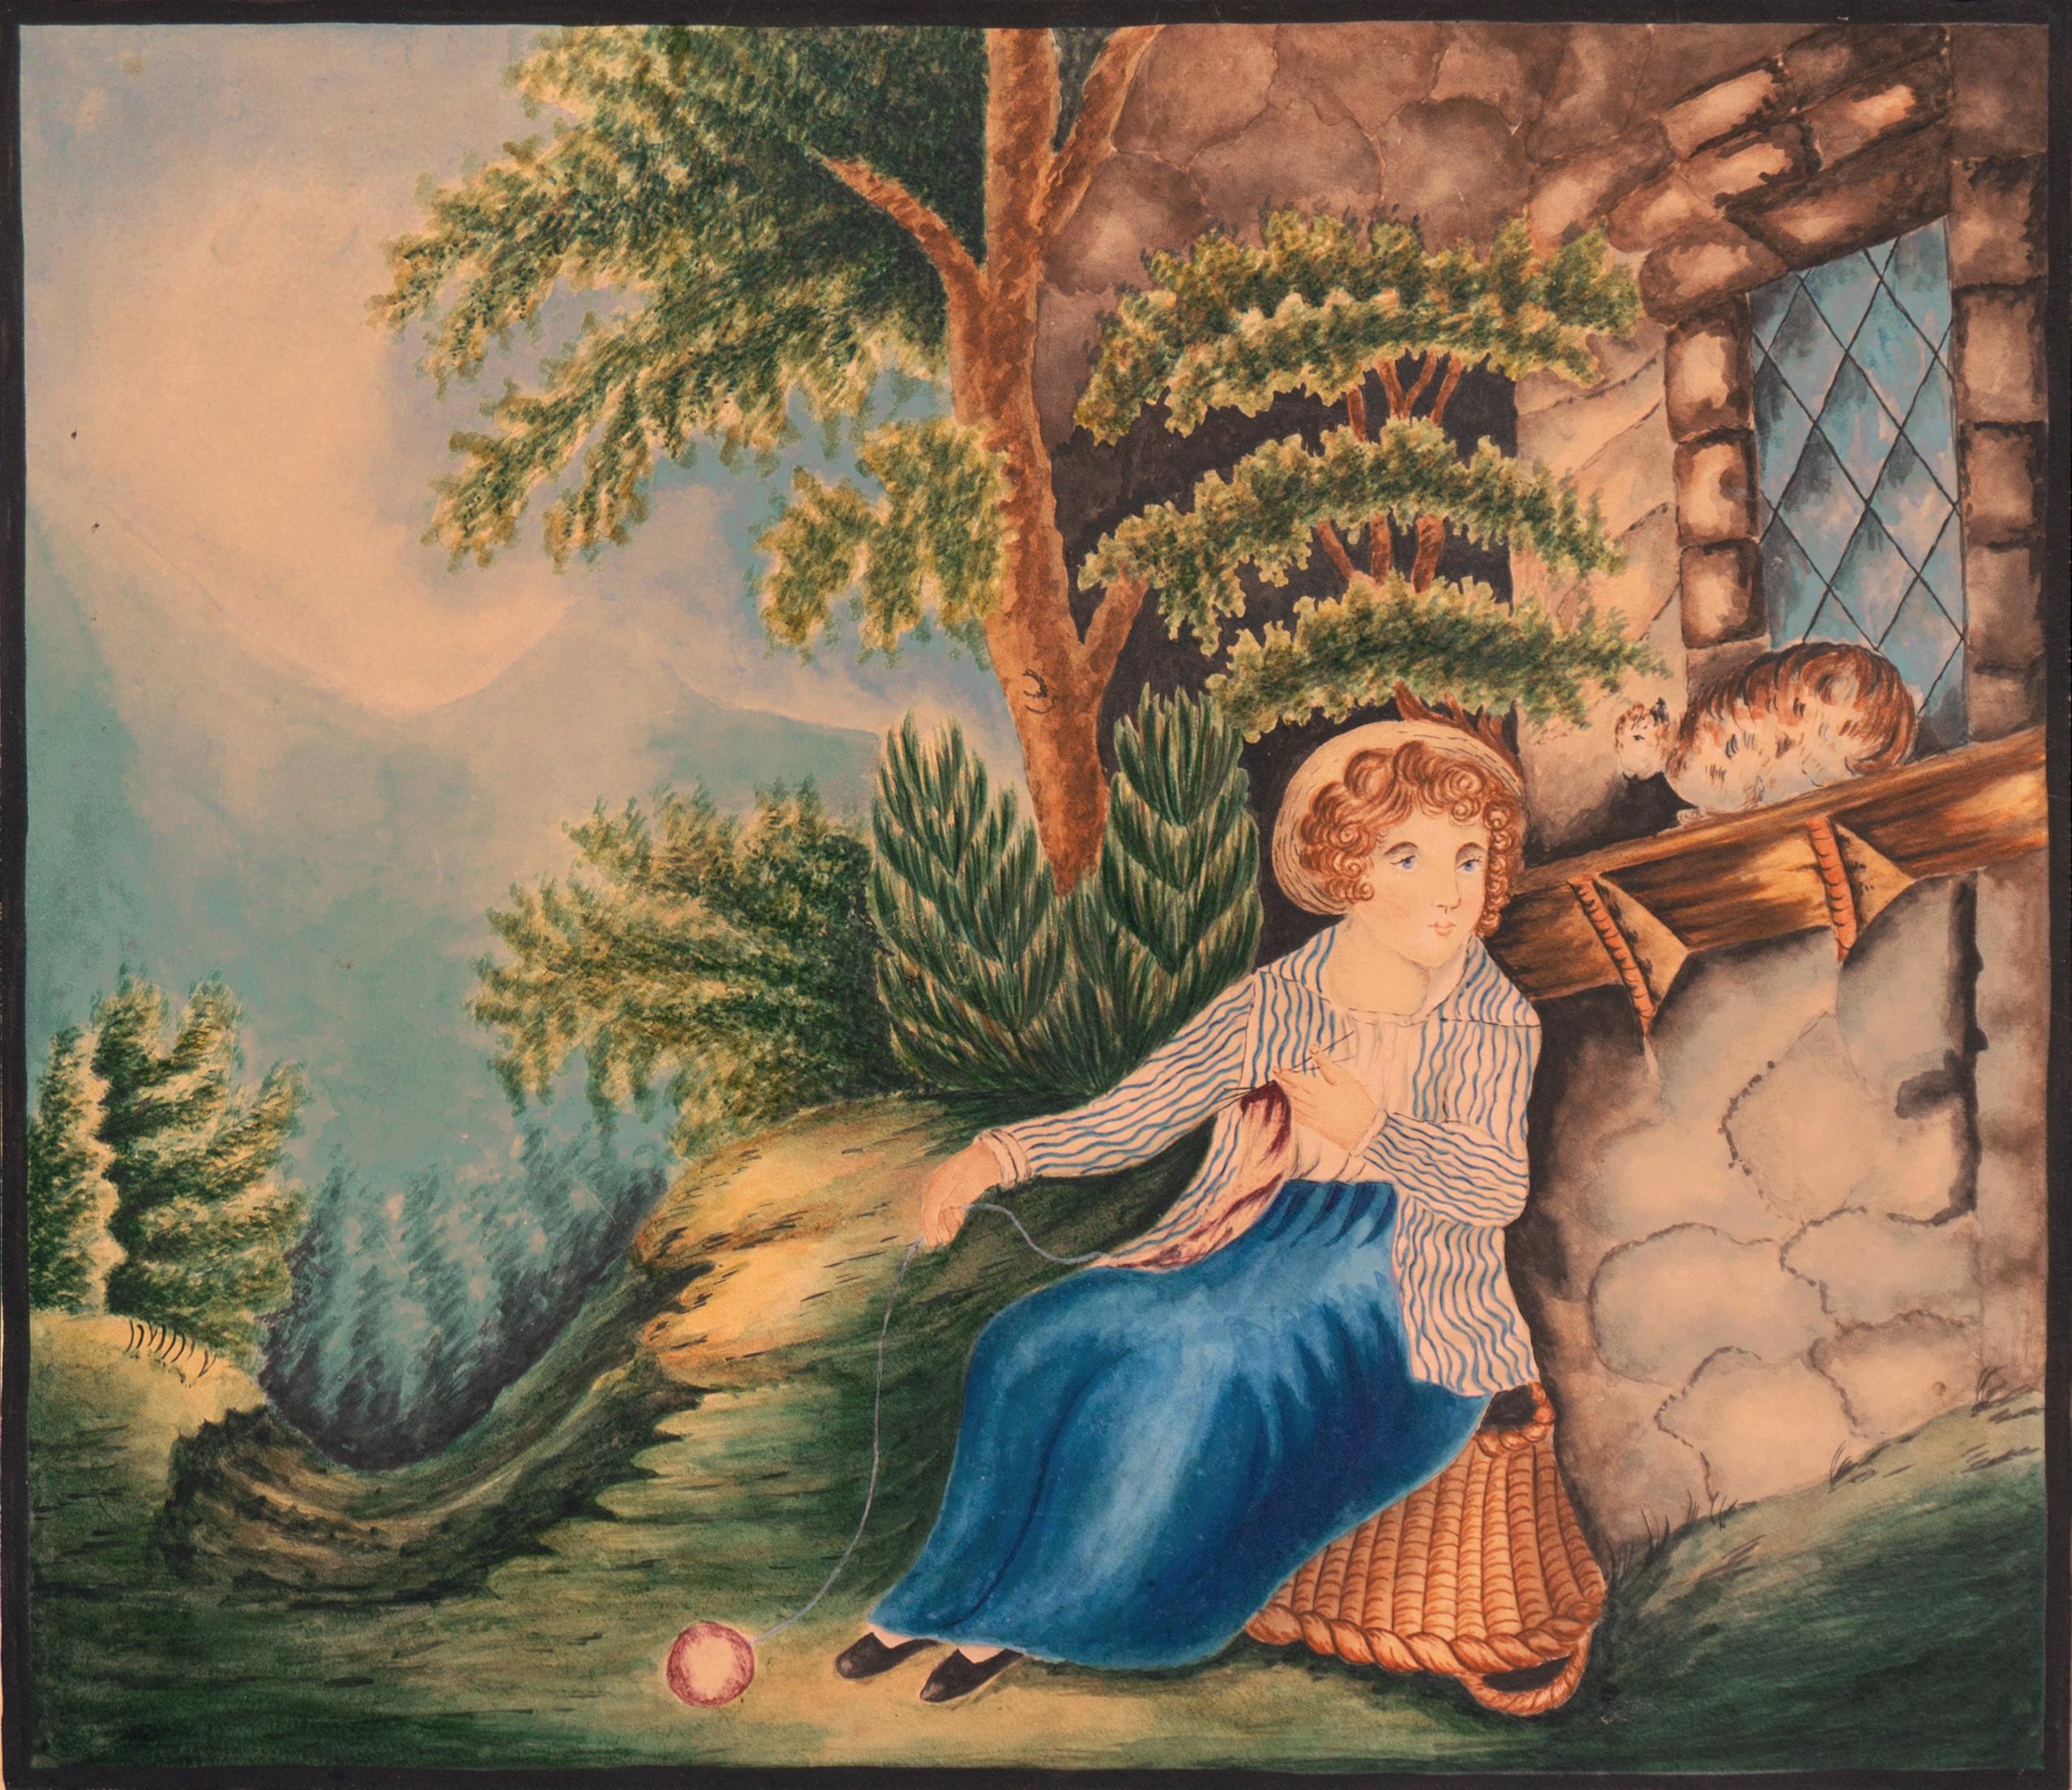 Early 19th Century American School Landscape Art - 'Woman Knitting by Cabin', American Frontier Life Oil, Westward Expansion, Cat 